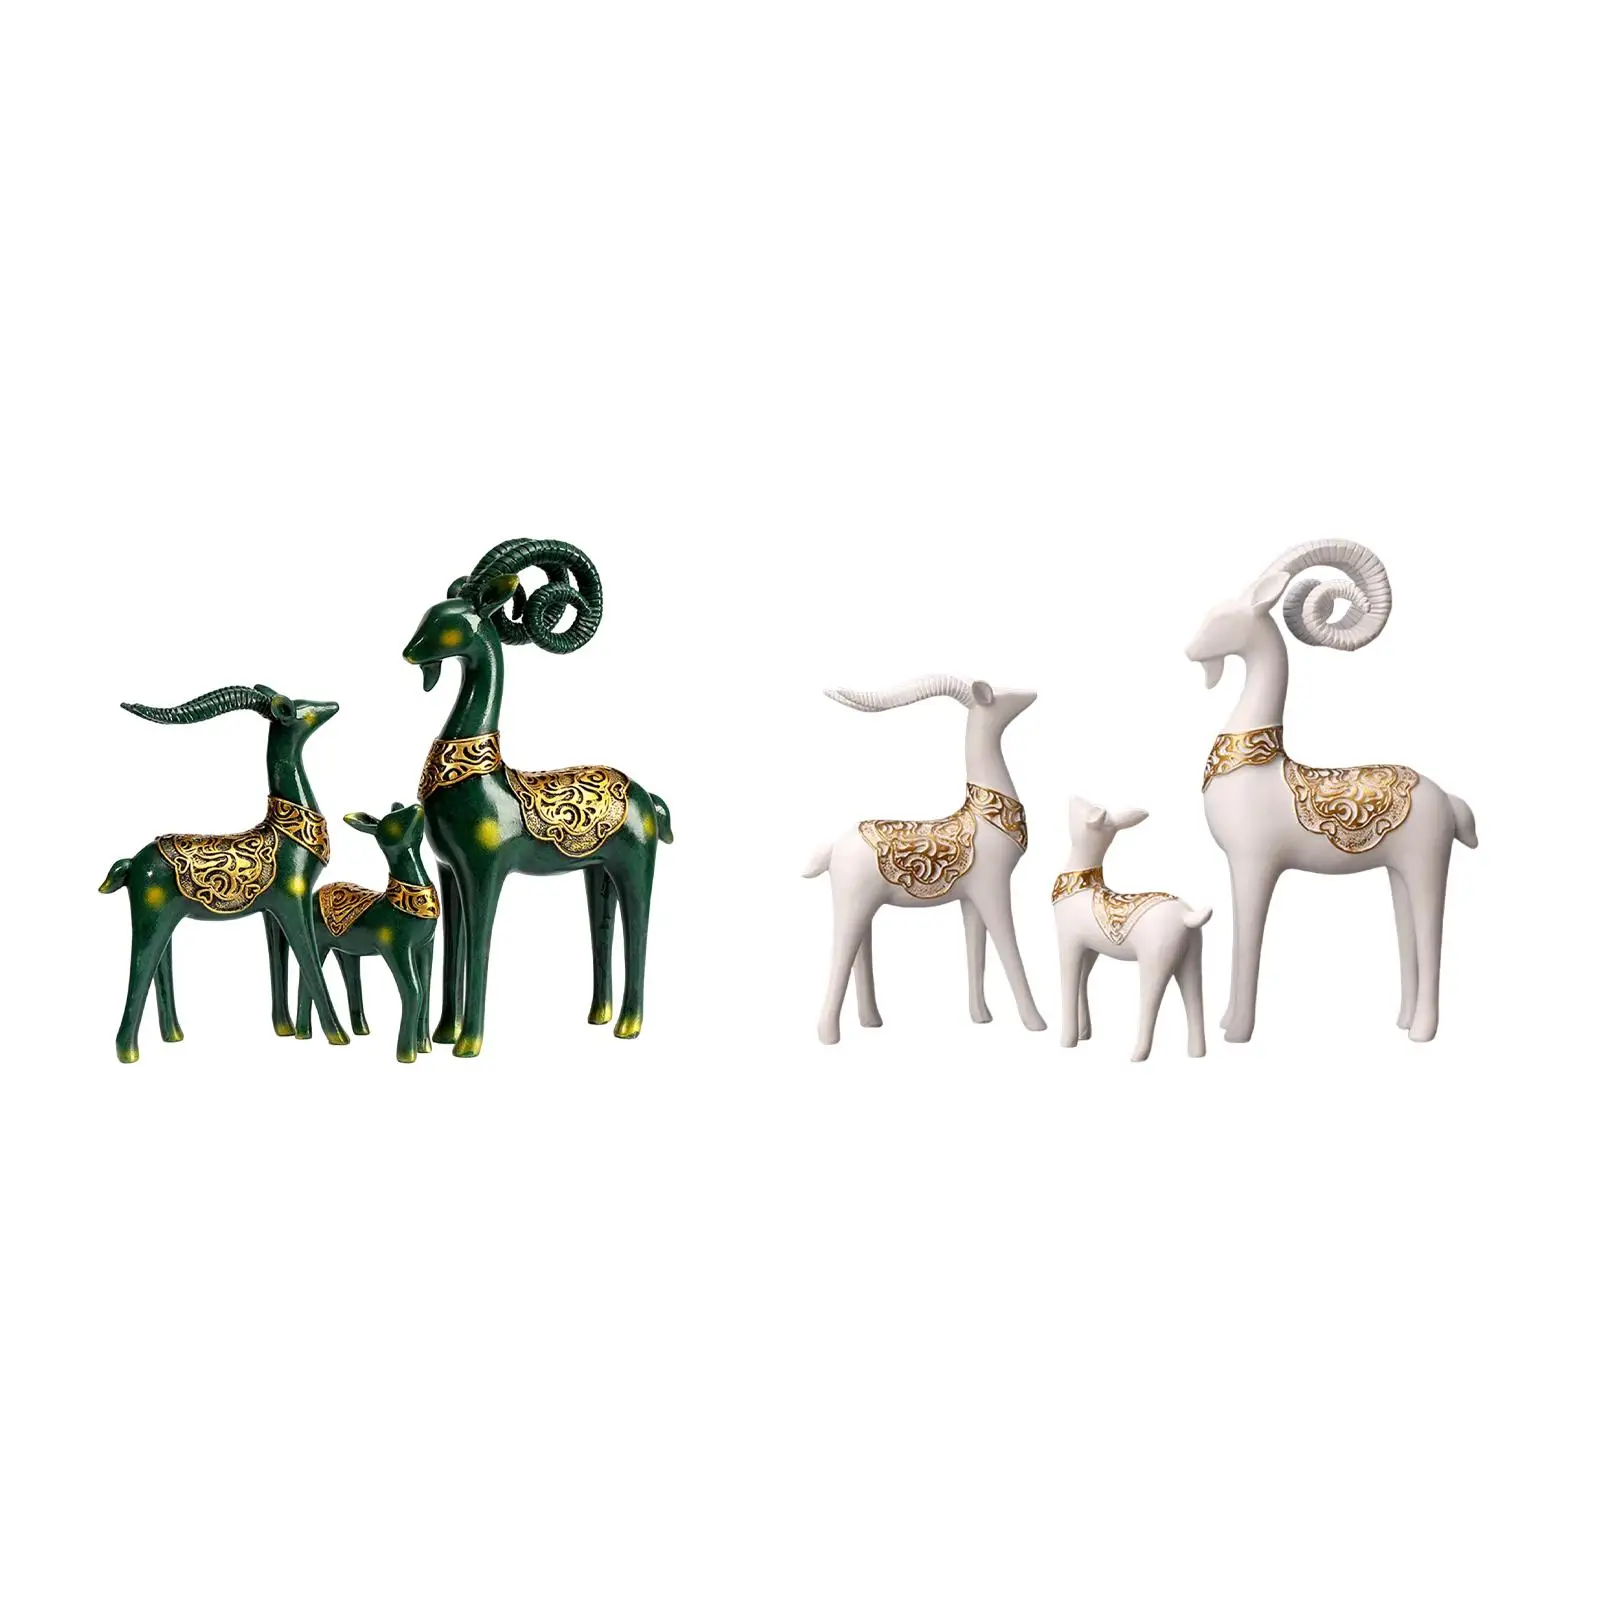 3Pcs Antelope Sculptures Standing Statue Decorative Tabletop Centerpiece for Xmas Holiday Party Home Party Supplies Elegant